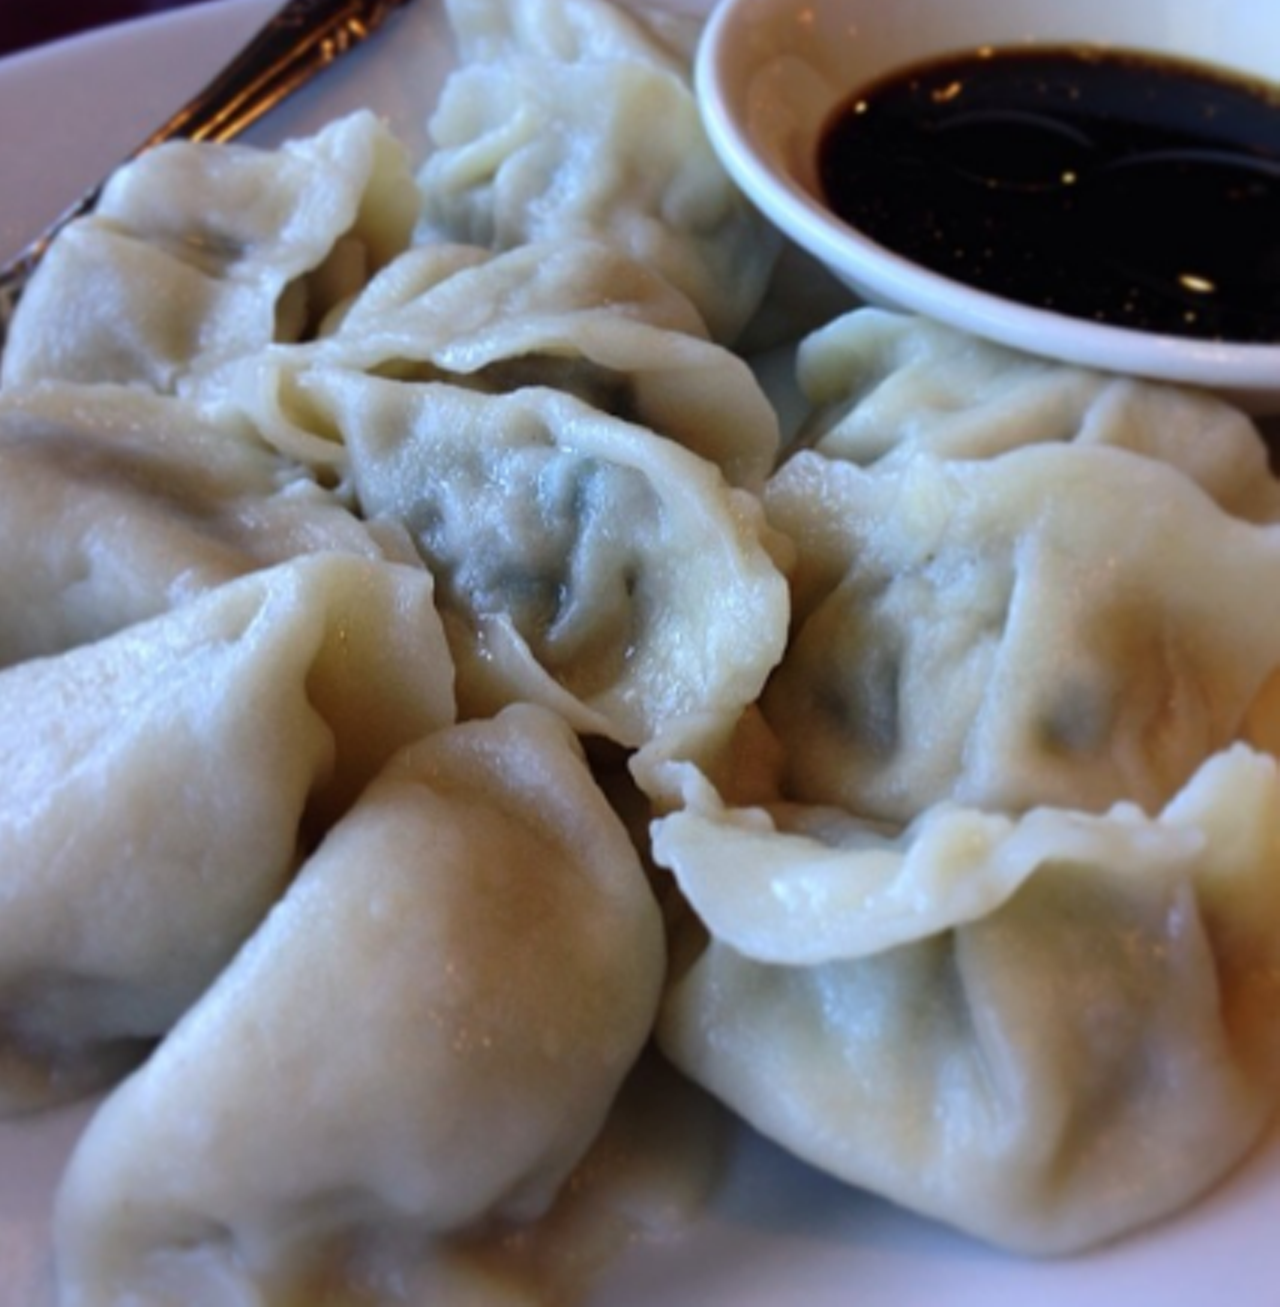  Pork and chive dumplings at Chuan Lu Garden
1101 E. Colonial Drive, 407-896-8966
Perfect pillows of ground pork, garlic, ginger and chives, served with Sichuan-style black vinegar. You can get them either pan-fried or steamed &#151; we suggest the latter.
Photo via le_nahs/Instagram